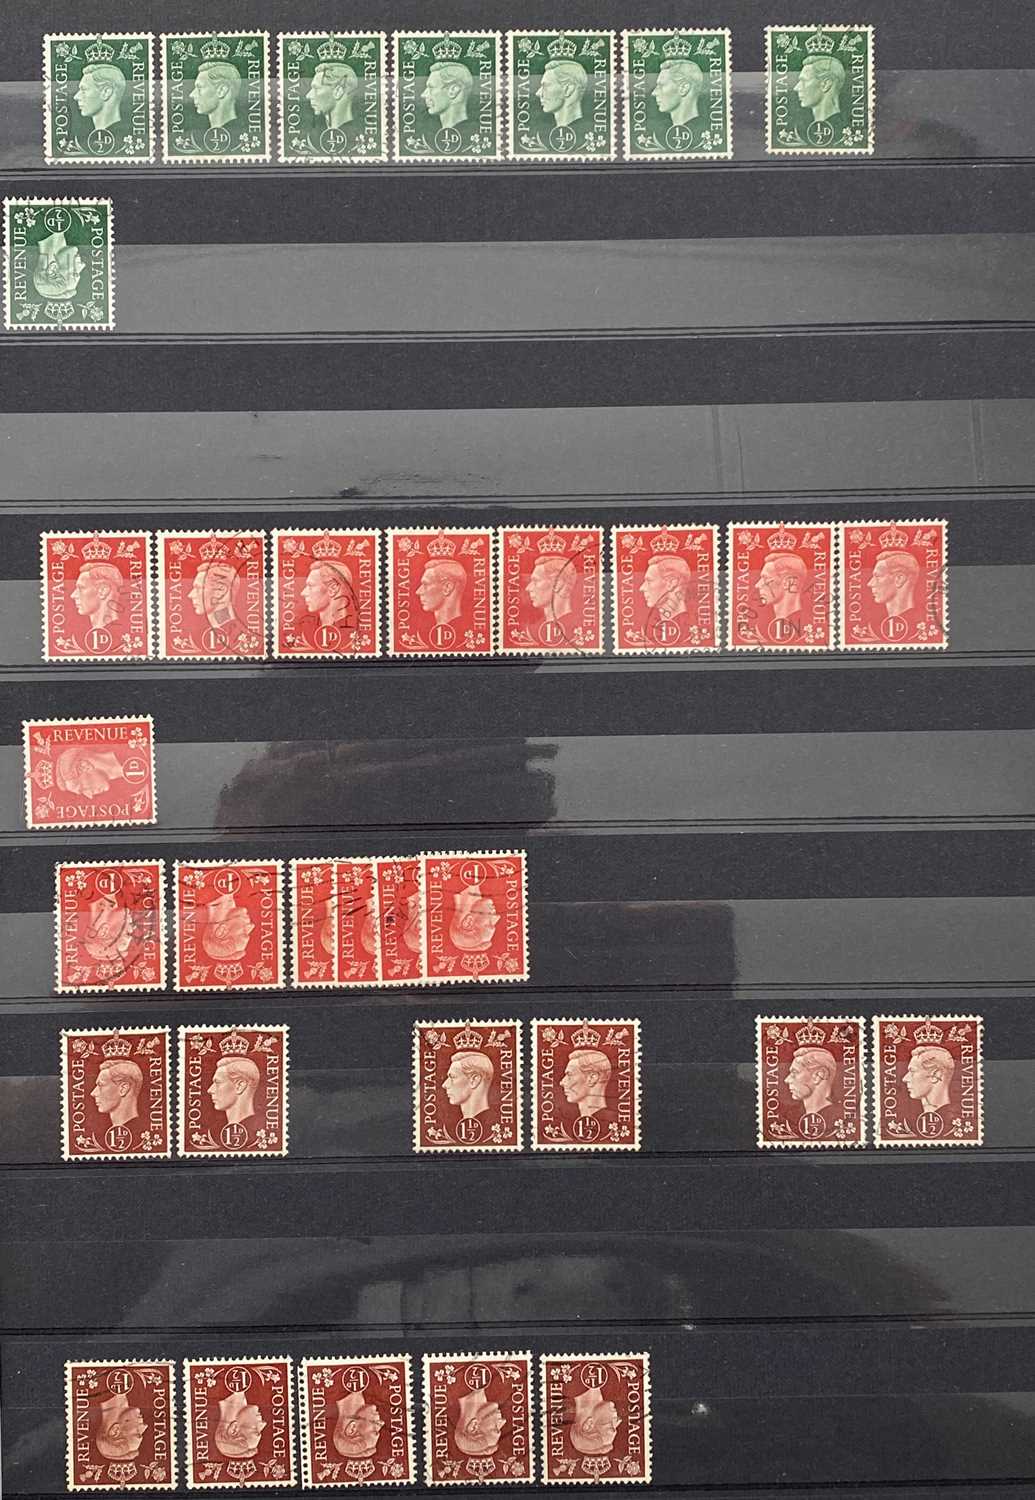 OFFERED WITH LOT 51 - GB STOCKBOOK - GV - QEII, mainly fine used or unmounted mint, GV1 high - Image 14 of 16